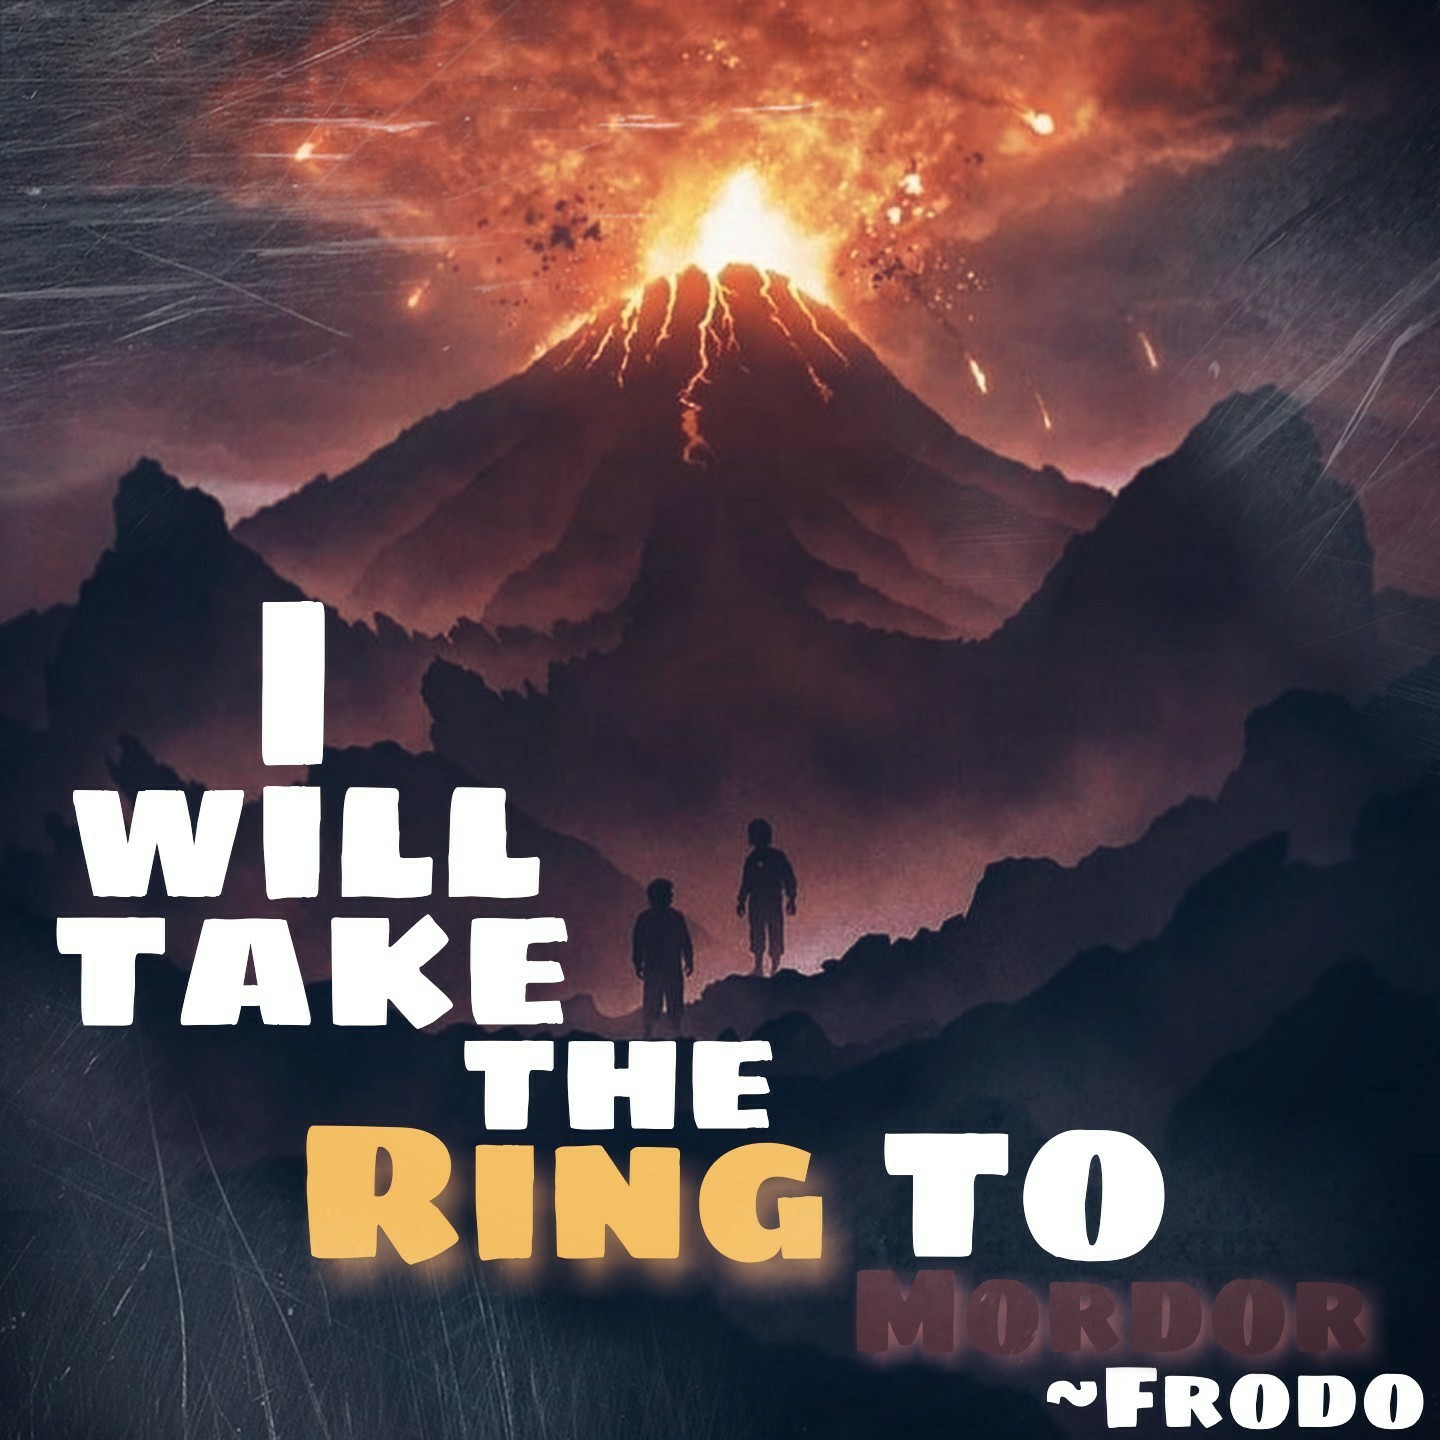 June 22nd is the day Bilbo came back to the Shire with the Ring